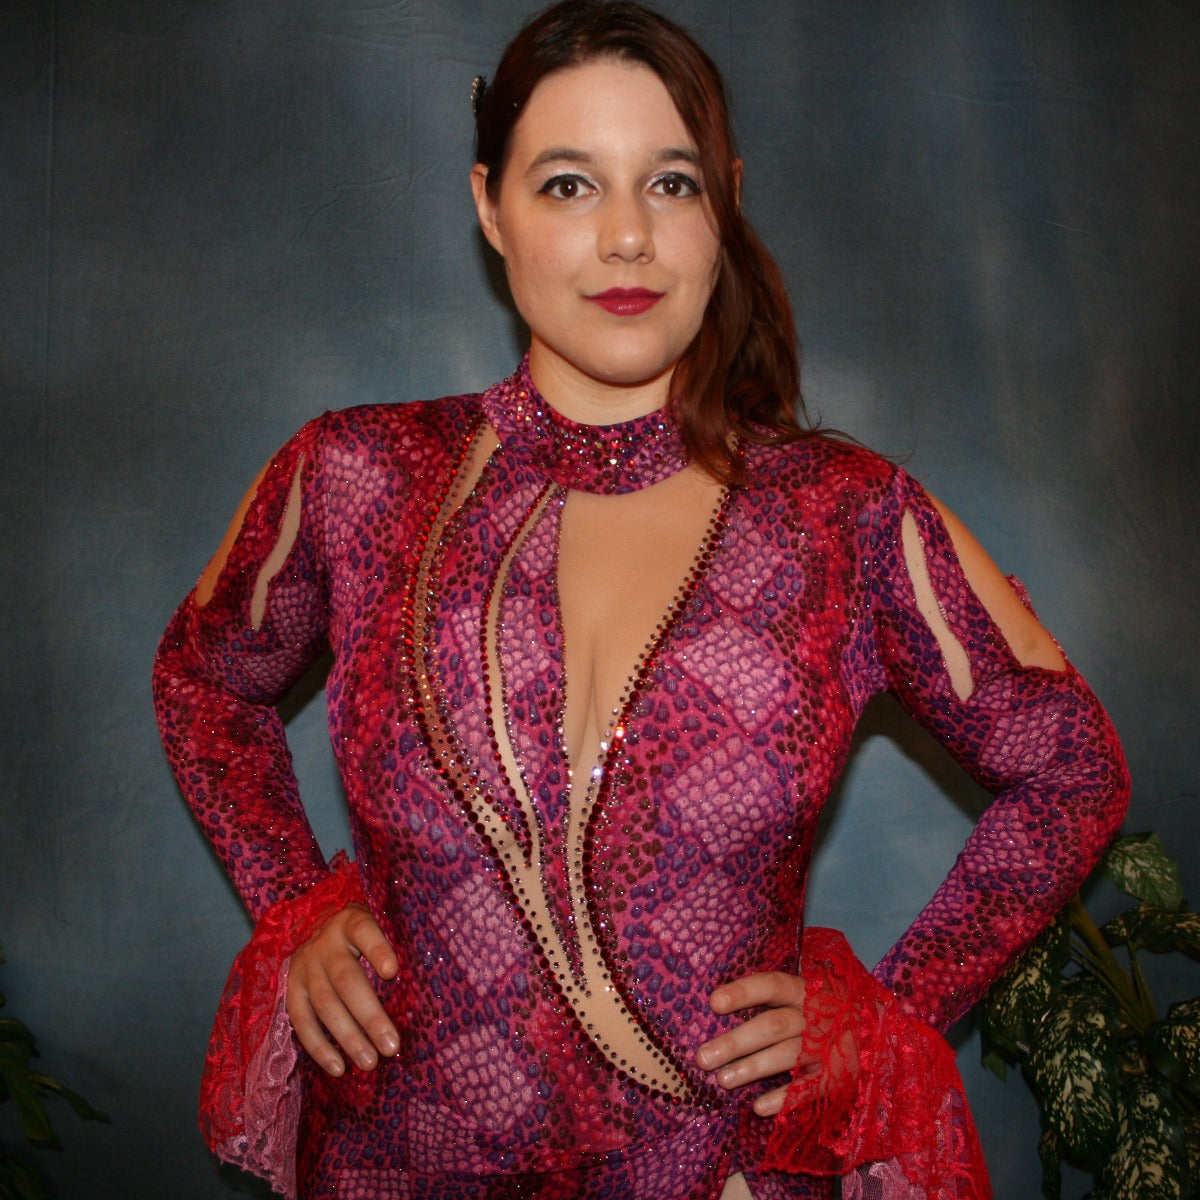 Crystal's Creations close up view of Red & purple Latin/rhythm dress created in gorgeous printed slinky glitterknit in reptilia print of reds, purples & orchids with nude illusion cutouts…oodles of lace flounces…embellished with siam & siam Ab Swarovski stonework.